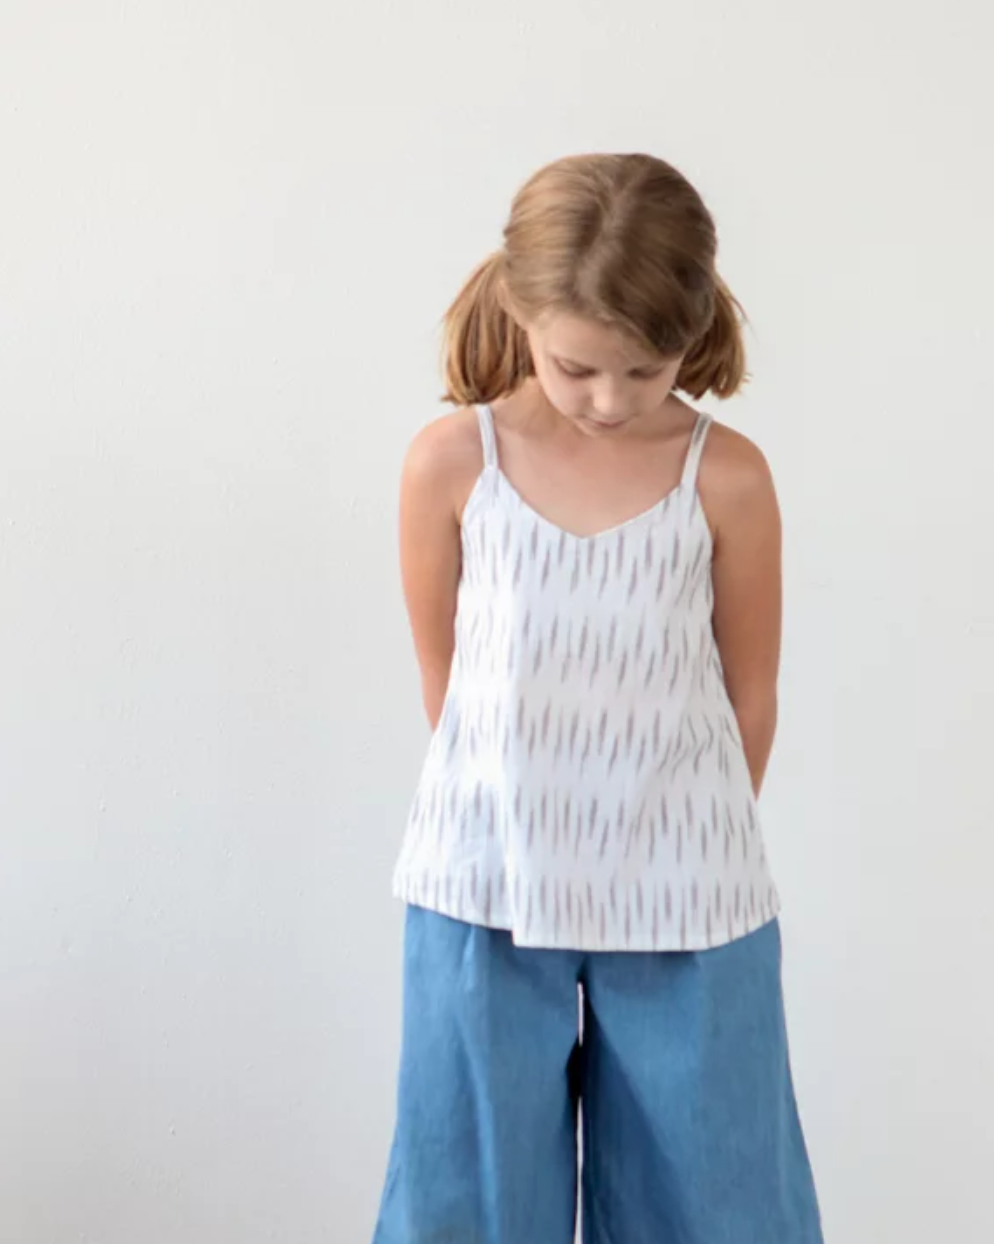 Girl wearing the Children’s Mini Ogden Cami sewing pattern by True Bias. A camisole pattern made in cotton voile, cotton lawn, linen or double gauze fabric featuring a soft V neck and spaghetti straps over each shoulder.